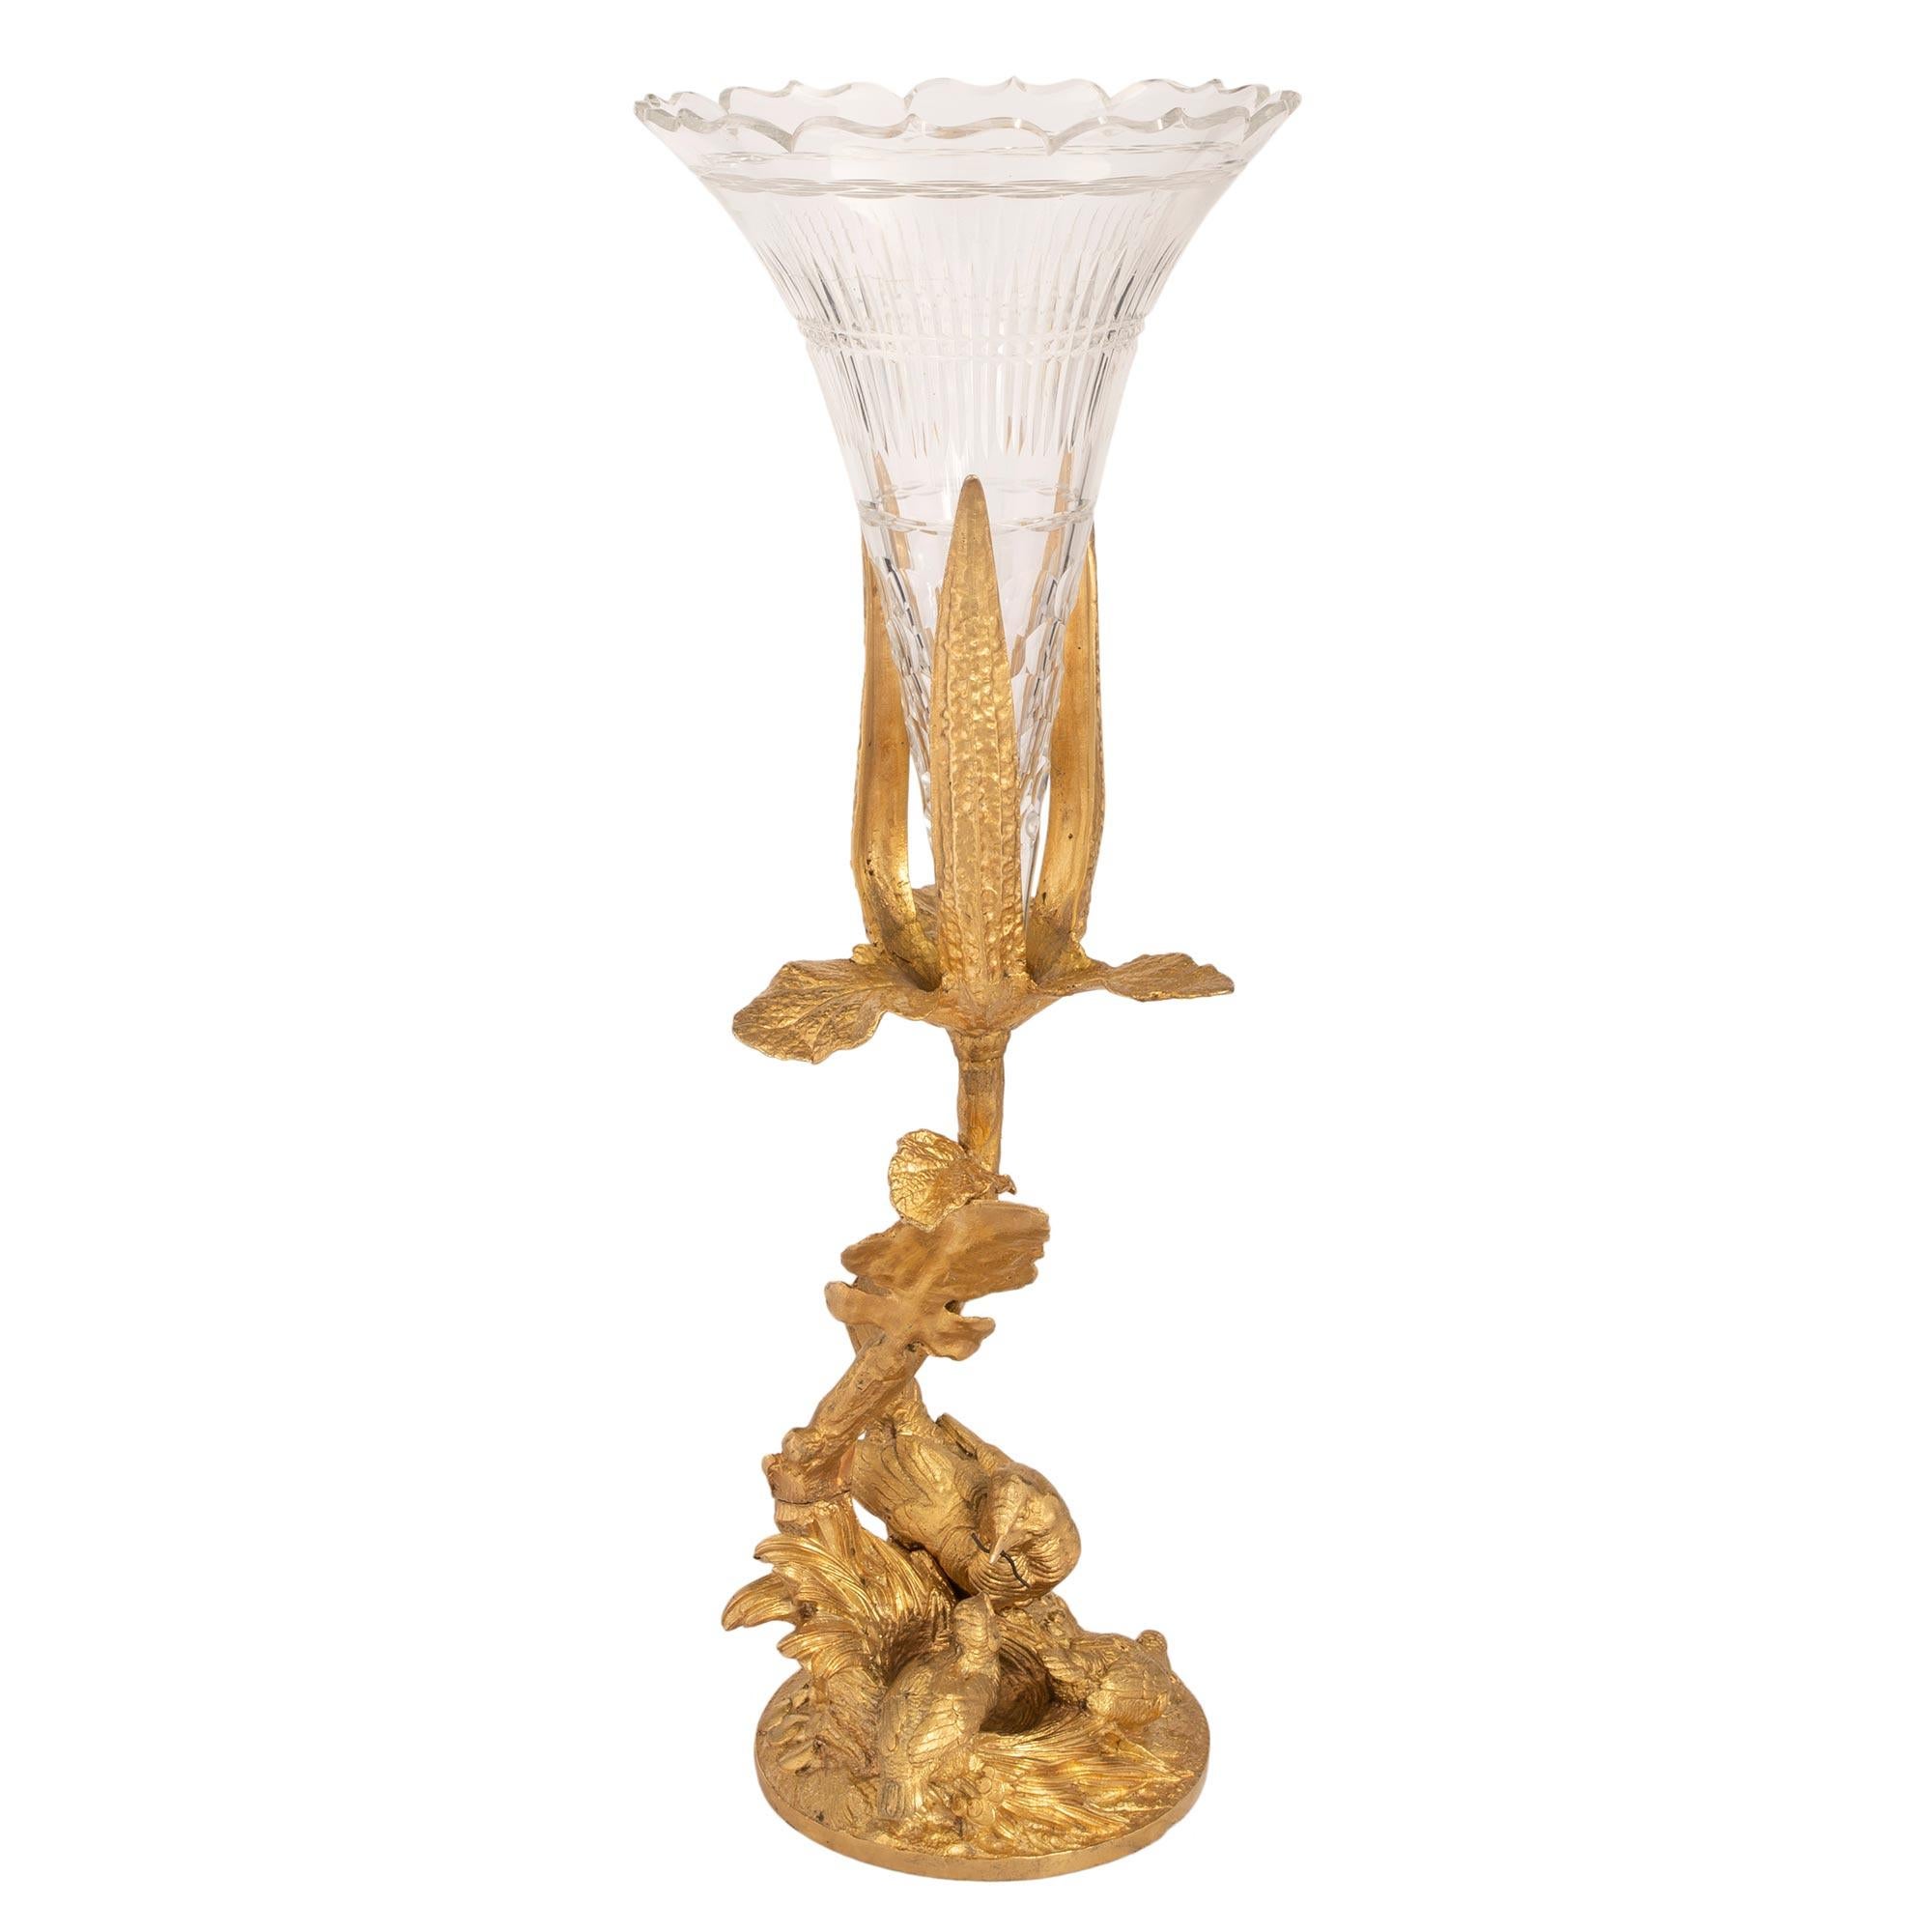 A beautiful and high quality French 19th century Louis XVI st. ormolu and Baccarat crystal vase. The vase is raised by a richly chased circular base, with charming birds in their nest, being fed by their mother. A branch extends upwards with finely